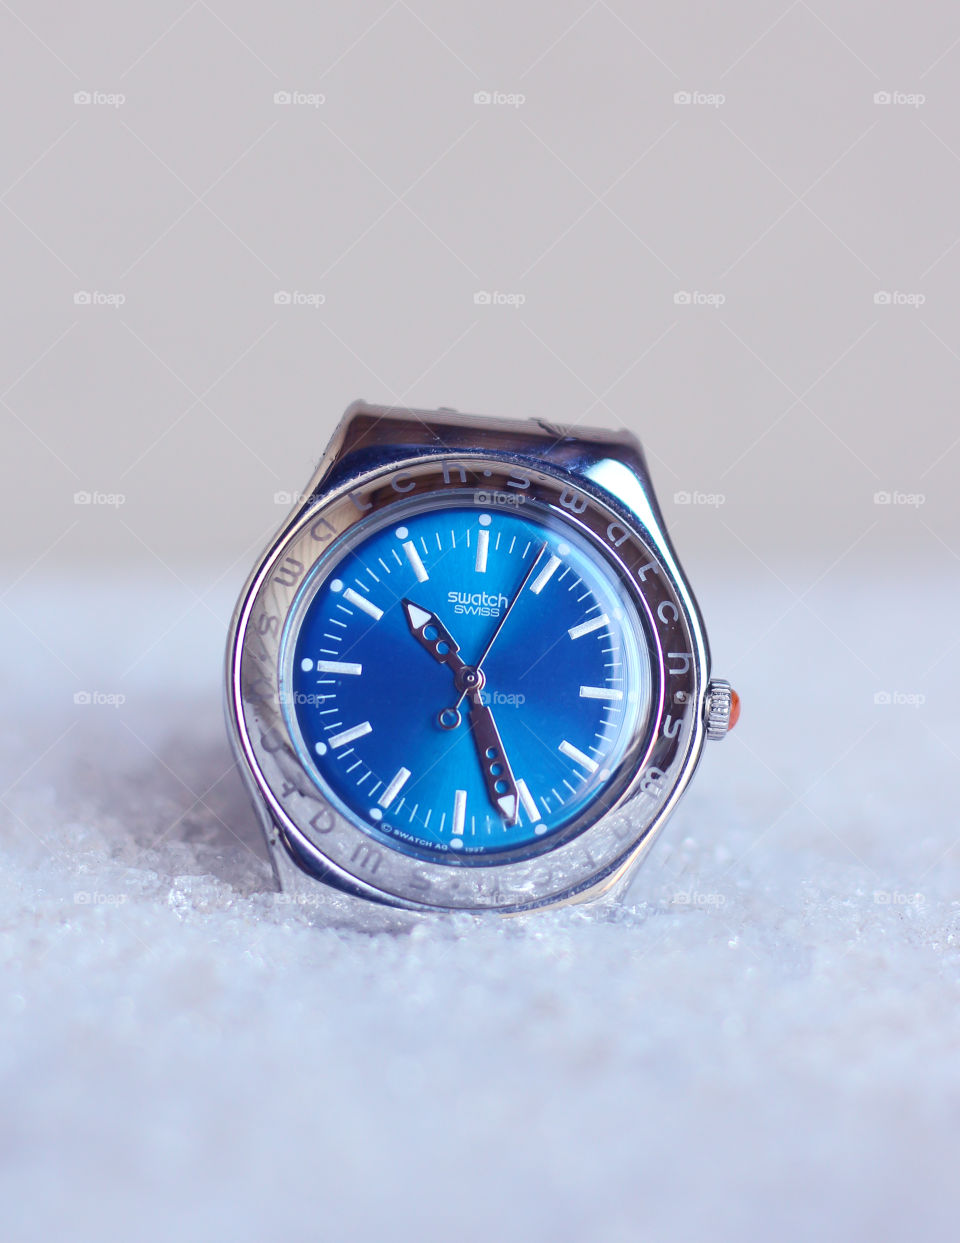 Swatch ladies wrist watch with Blue dial